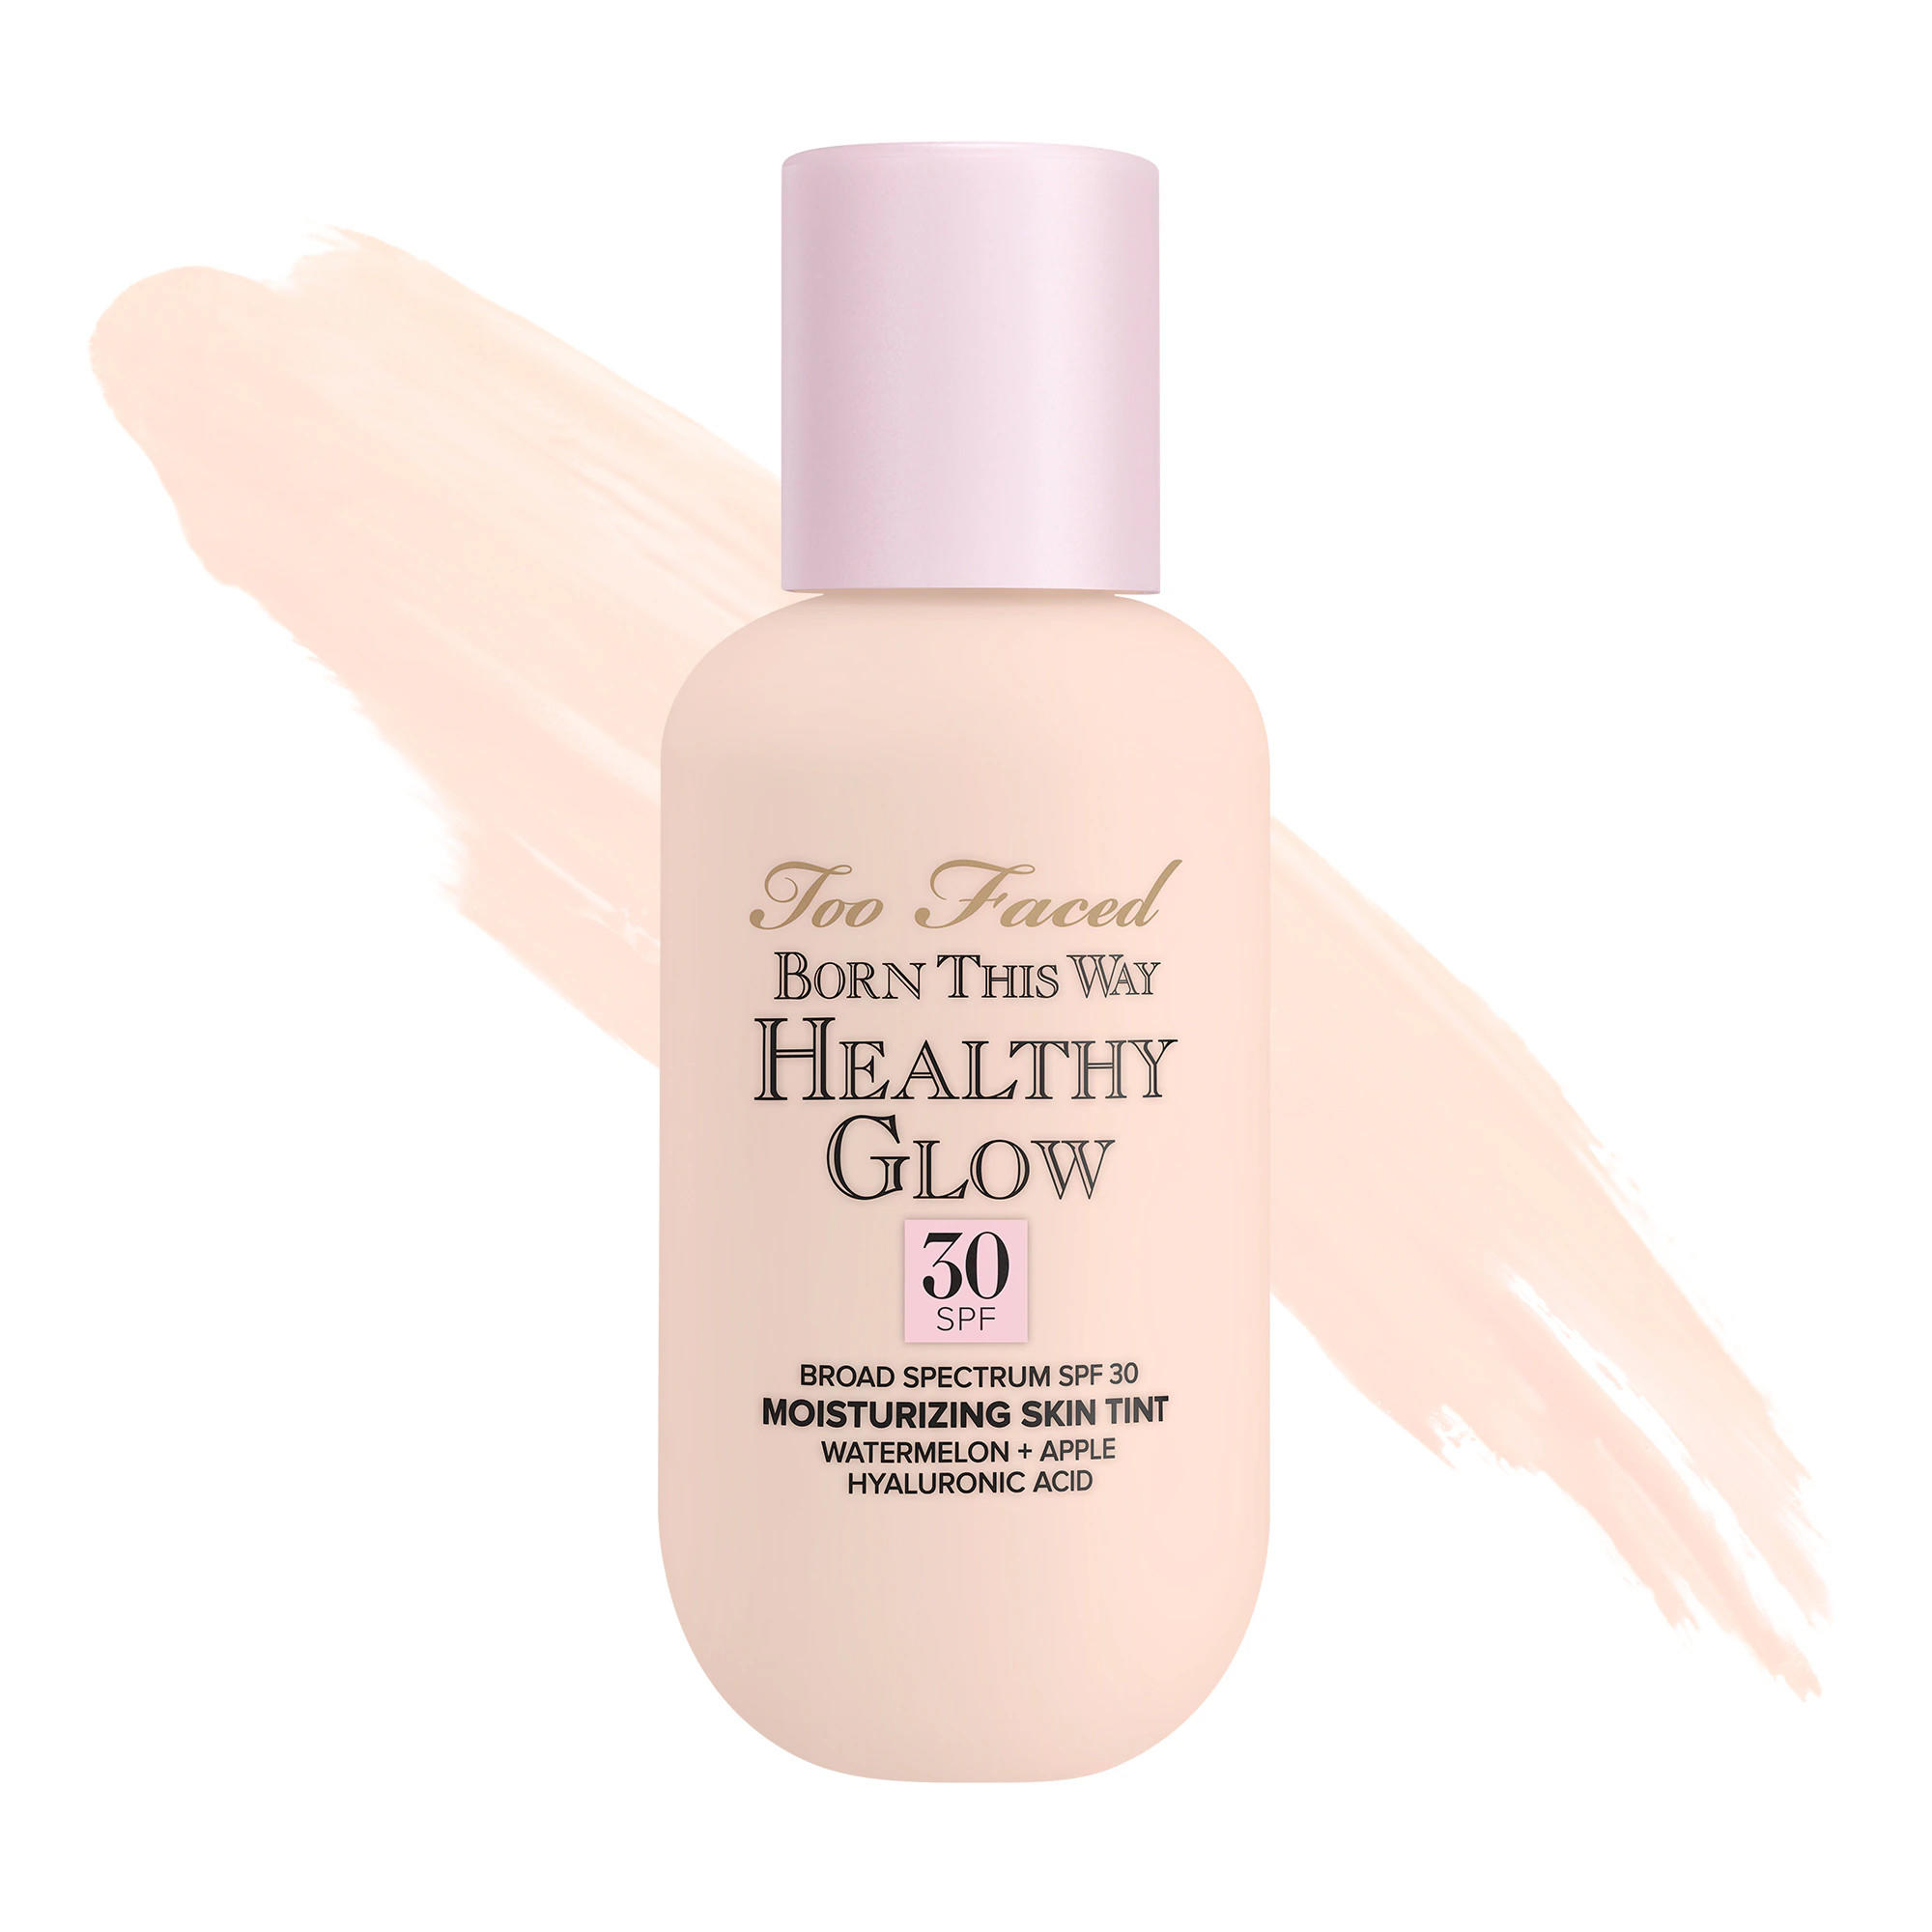 Too Faced Born This Way Healthy Glow Skin Tint Foundation Snow